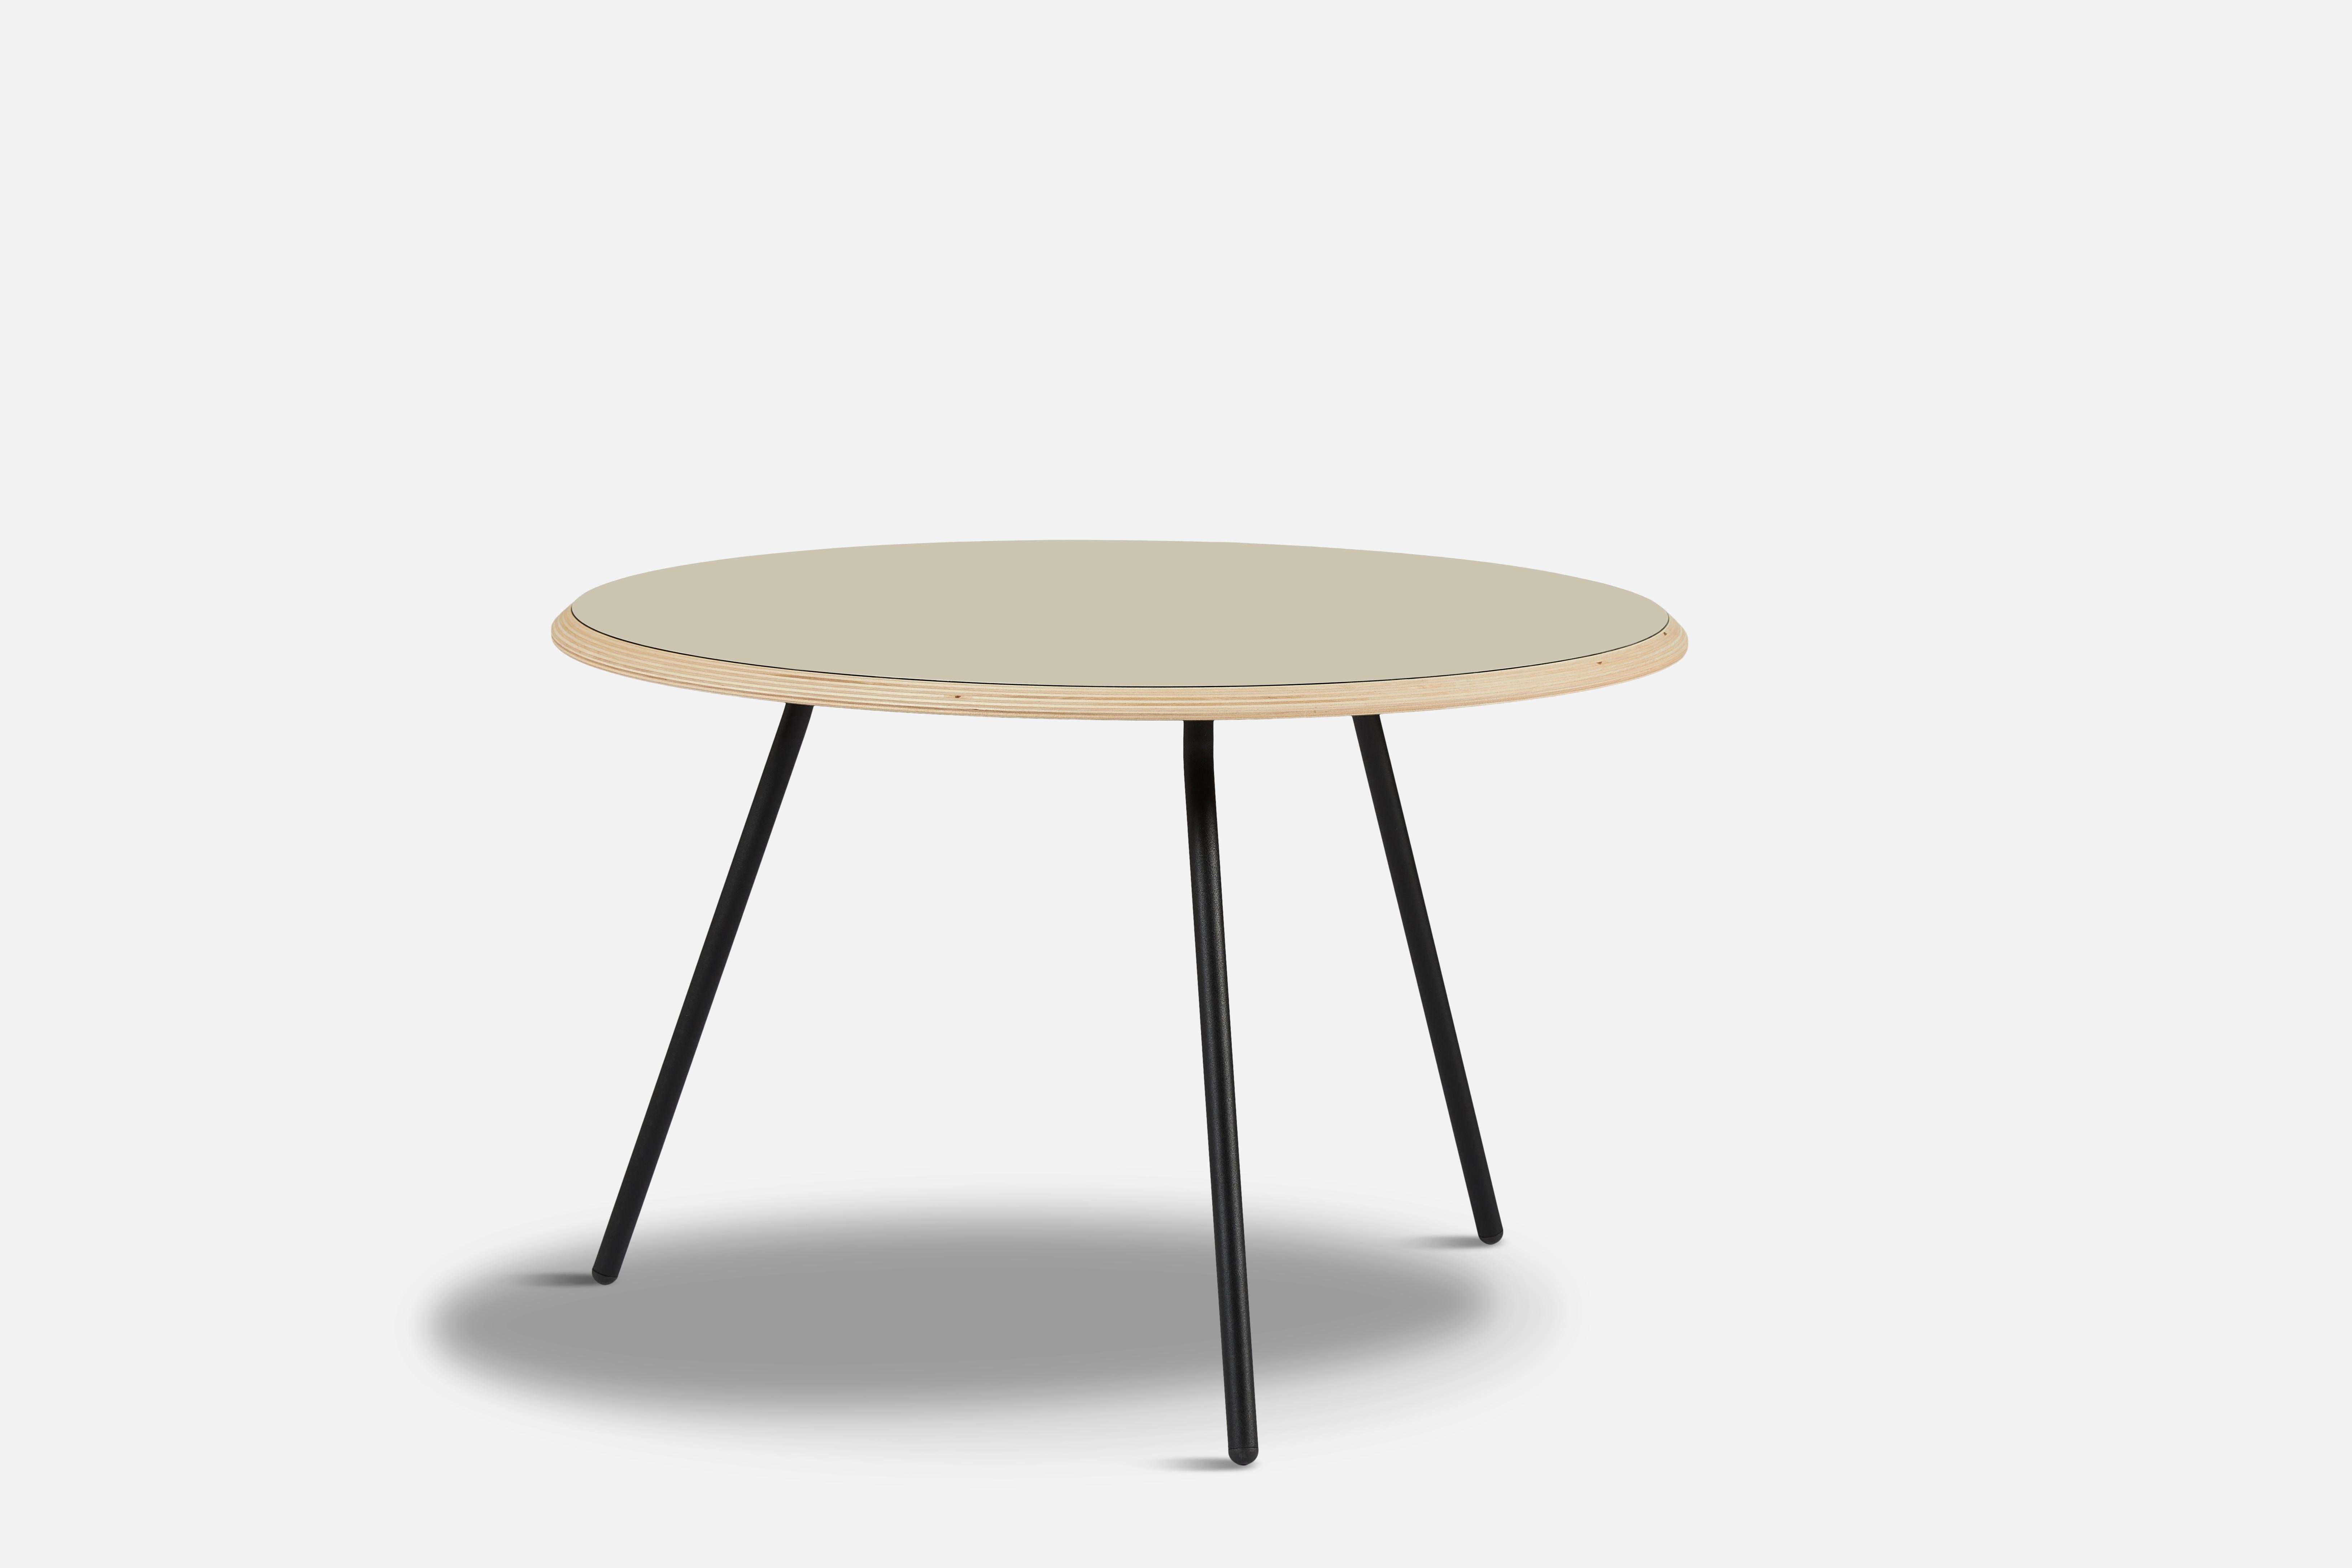 Beige Fenix Laminate Soround coffee table 75 by Nur Design
Materials: Metal, Fenix Laminate
Dimensions: D 75 x W 75 x H 49 cm
Also available in different dimensions. 

The founders, Mia and Torben Koed, decided to put their 30 years of